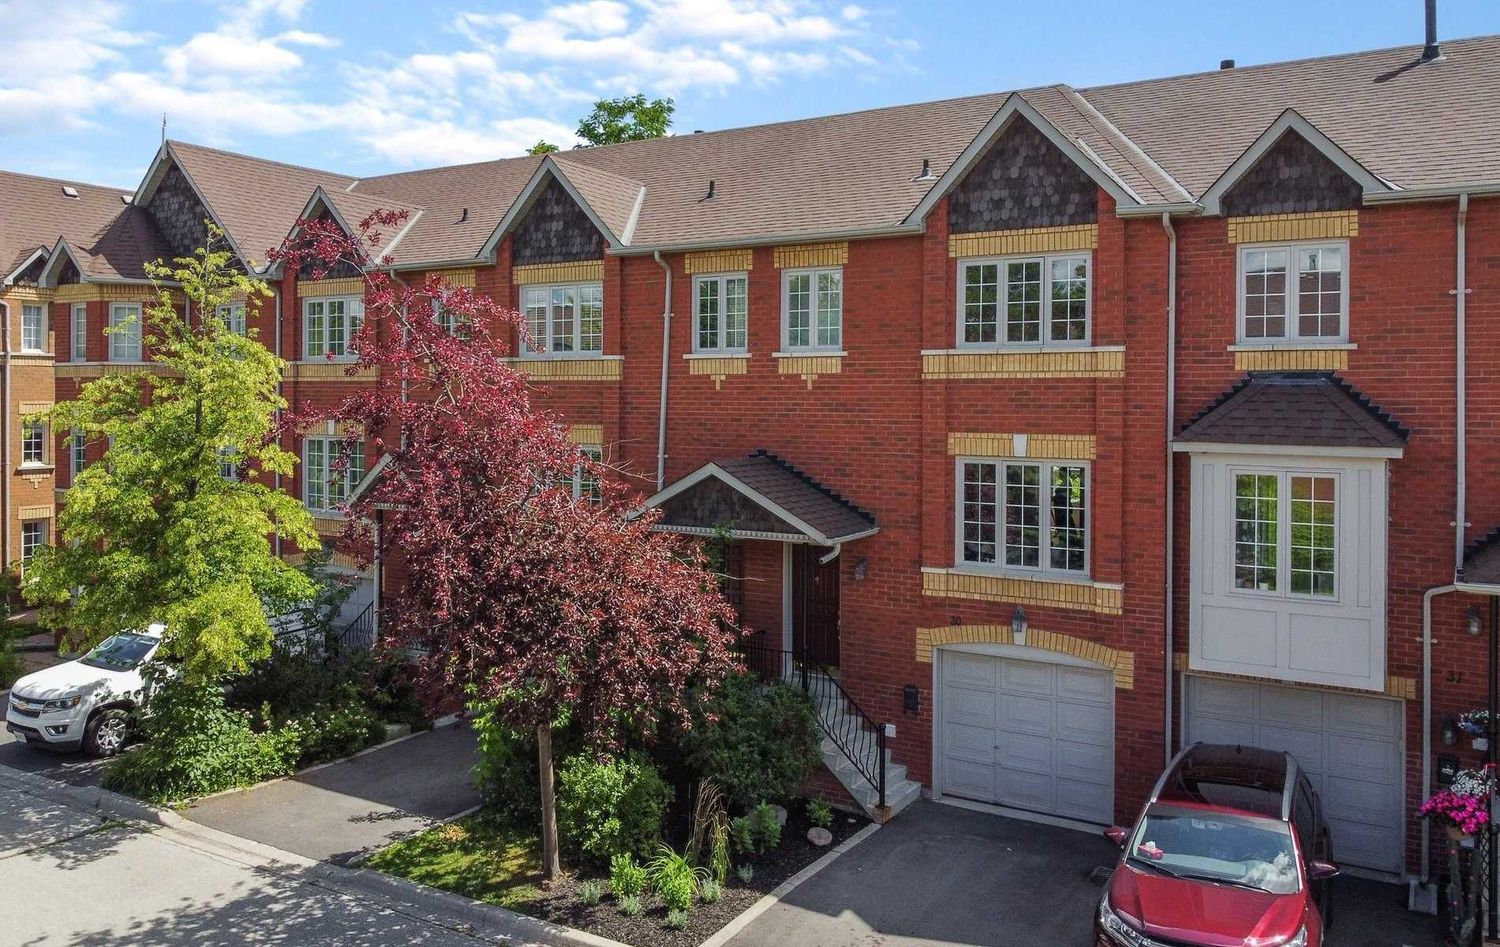 95 Weldrick Road E. Observatory Gate Townhomes is located in  Richmond Hill, Toronto - image #2 of 3